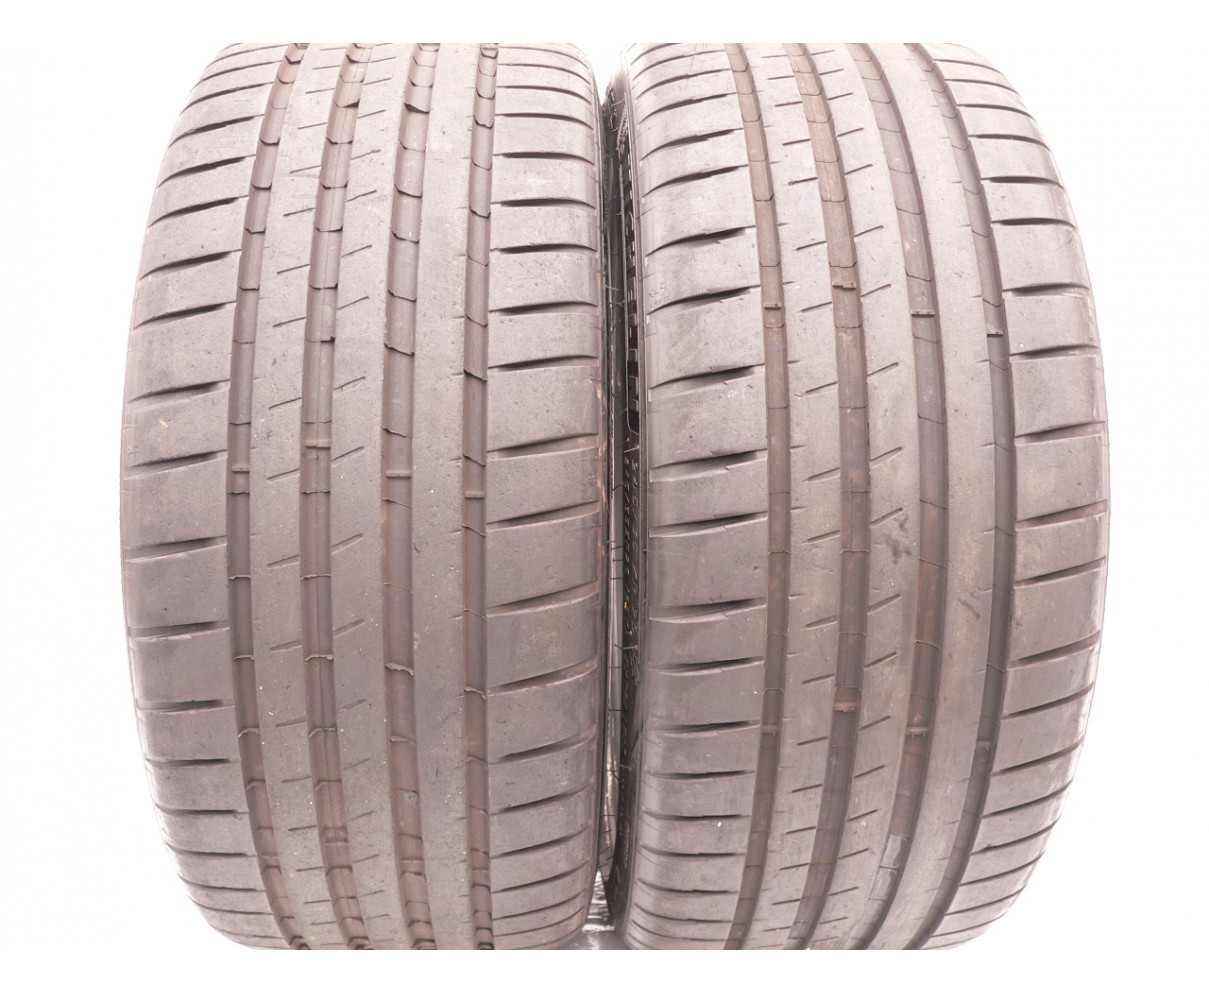 2 used tires 255 35 19 Michelin Pilot Sport 4S 96Y 80% life